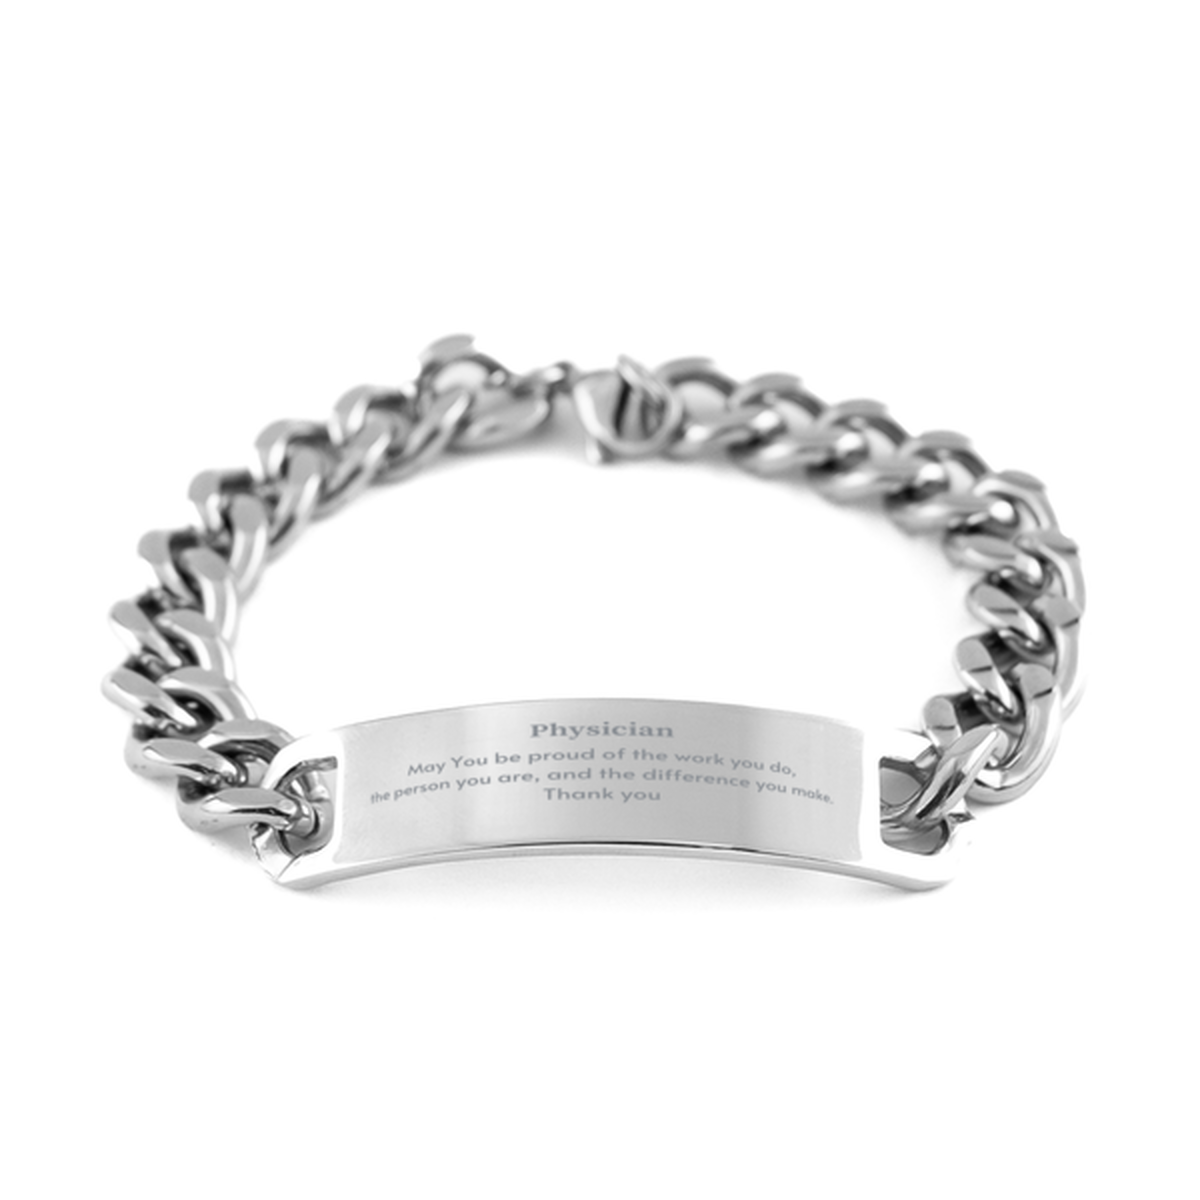 Heartwarming Cuban Chain Stainless Steel Bracelet Retirement Coworkers Gifts for Physician, Physician May You be proud of the work you do, the person you are Gifts for Boss Men Women Friends